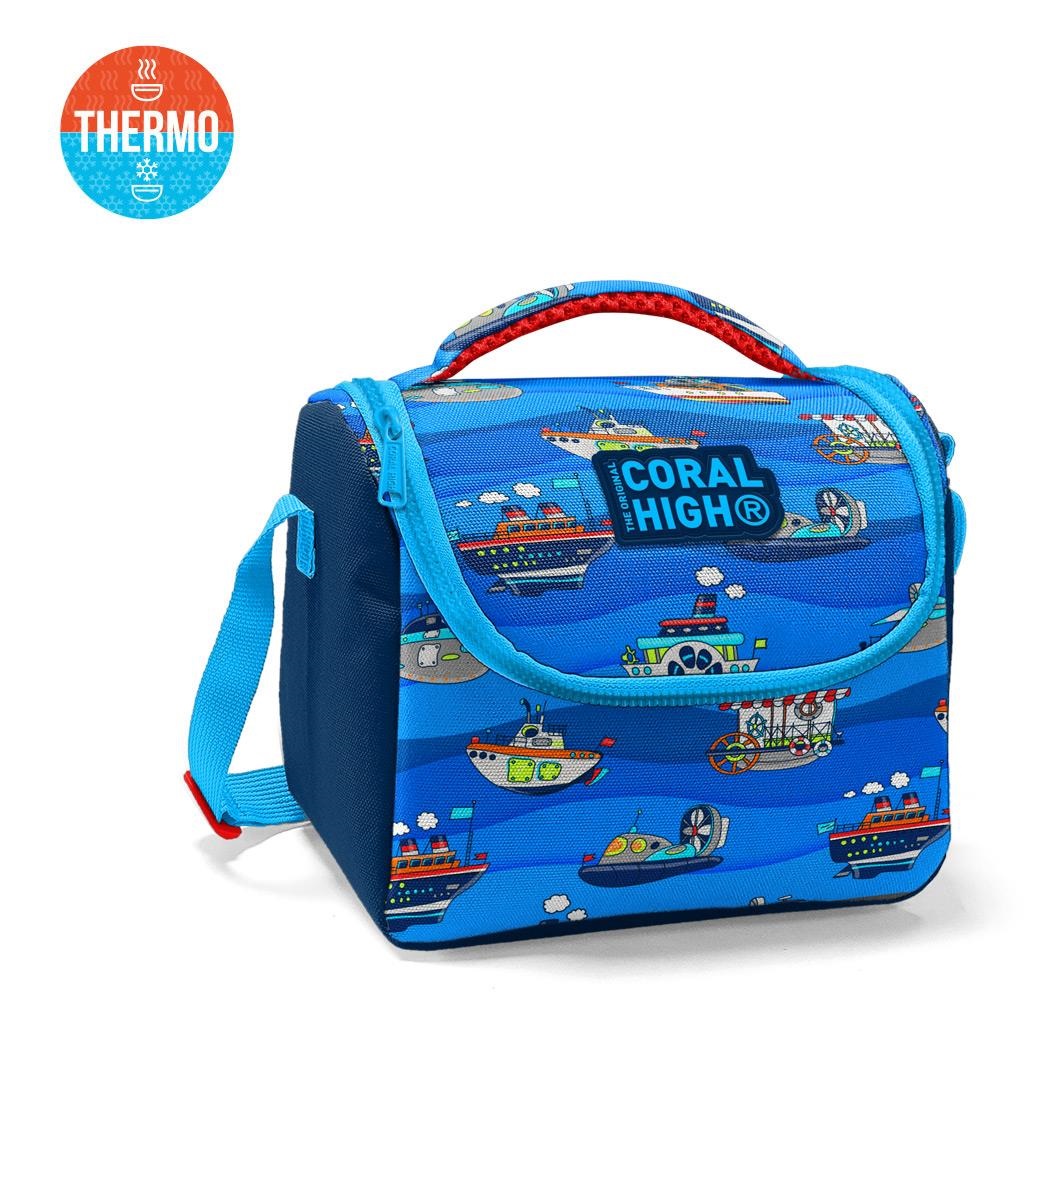 Coral High Kids Thermal Lunch Bag - Navy Blue Blue Ship Patterned